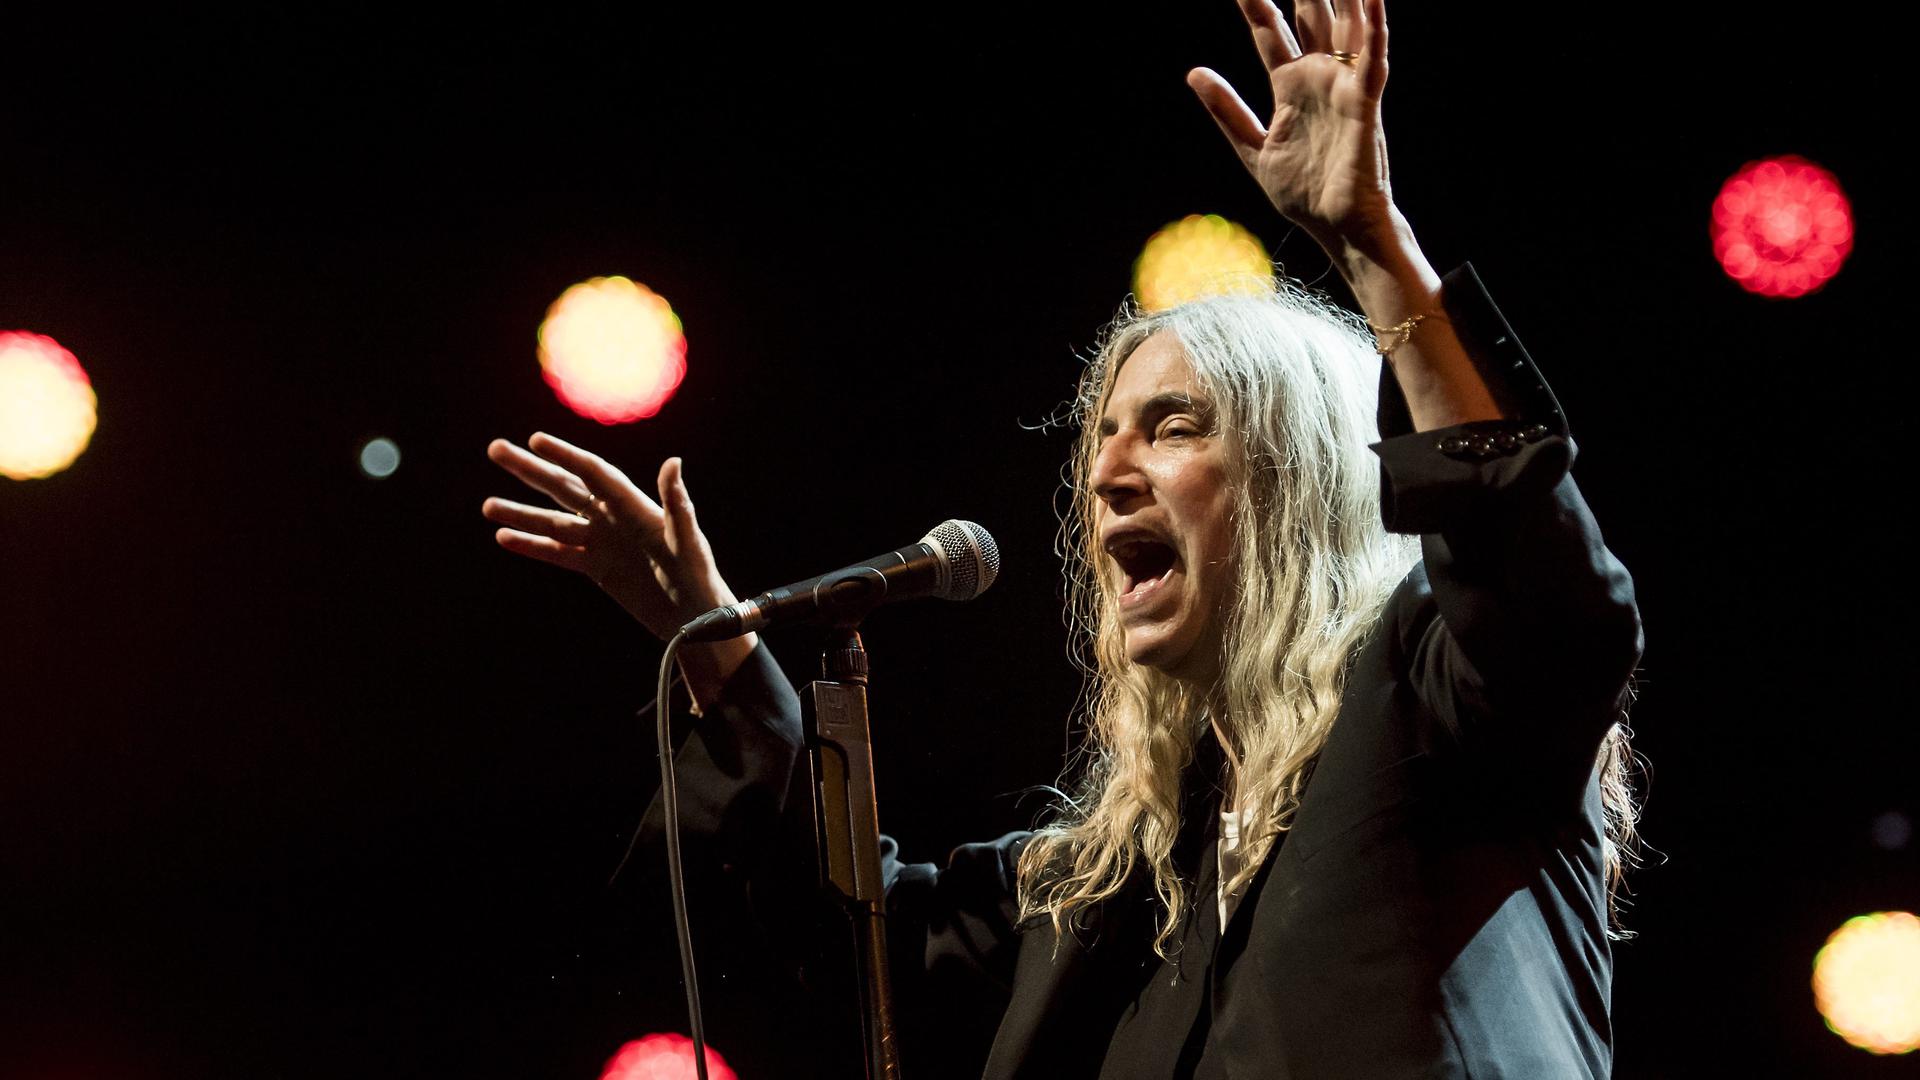 epa05411323 US singer Patti Smith performs on the Auditorium Stravinski stage during the 50th Montreux Jazz Festival, in Montreux, Switzerland, 06 July 2016. The music festival runs from 01 to 16 July. EPA/JEAN-CHRISTOPHE BOTT EDITORIAL USE ONLY ++ +++ dpa-Bildfunk +++